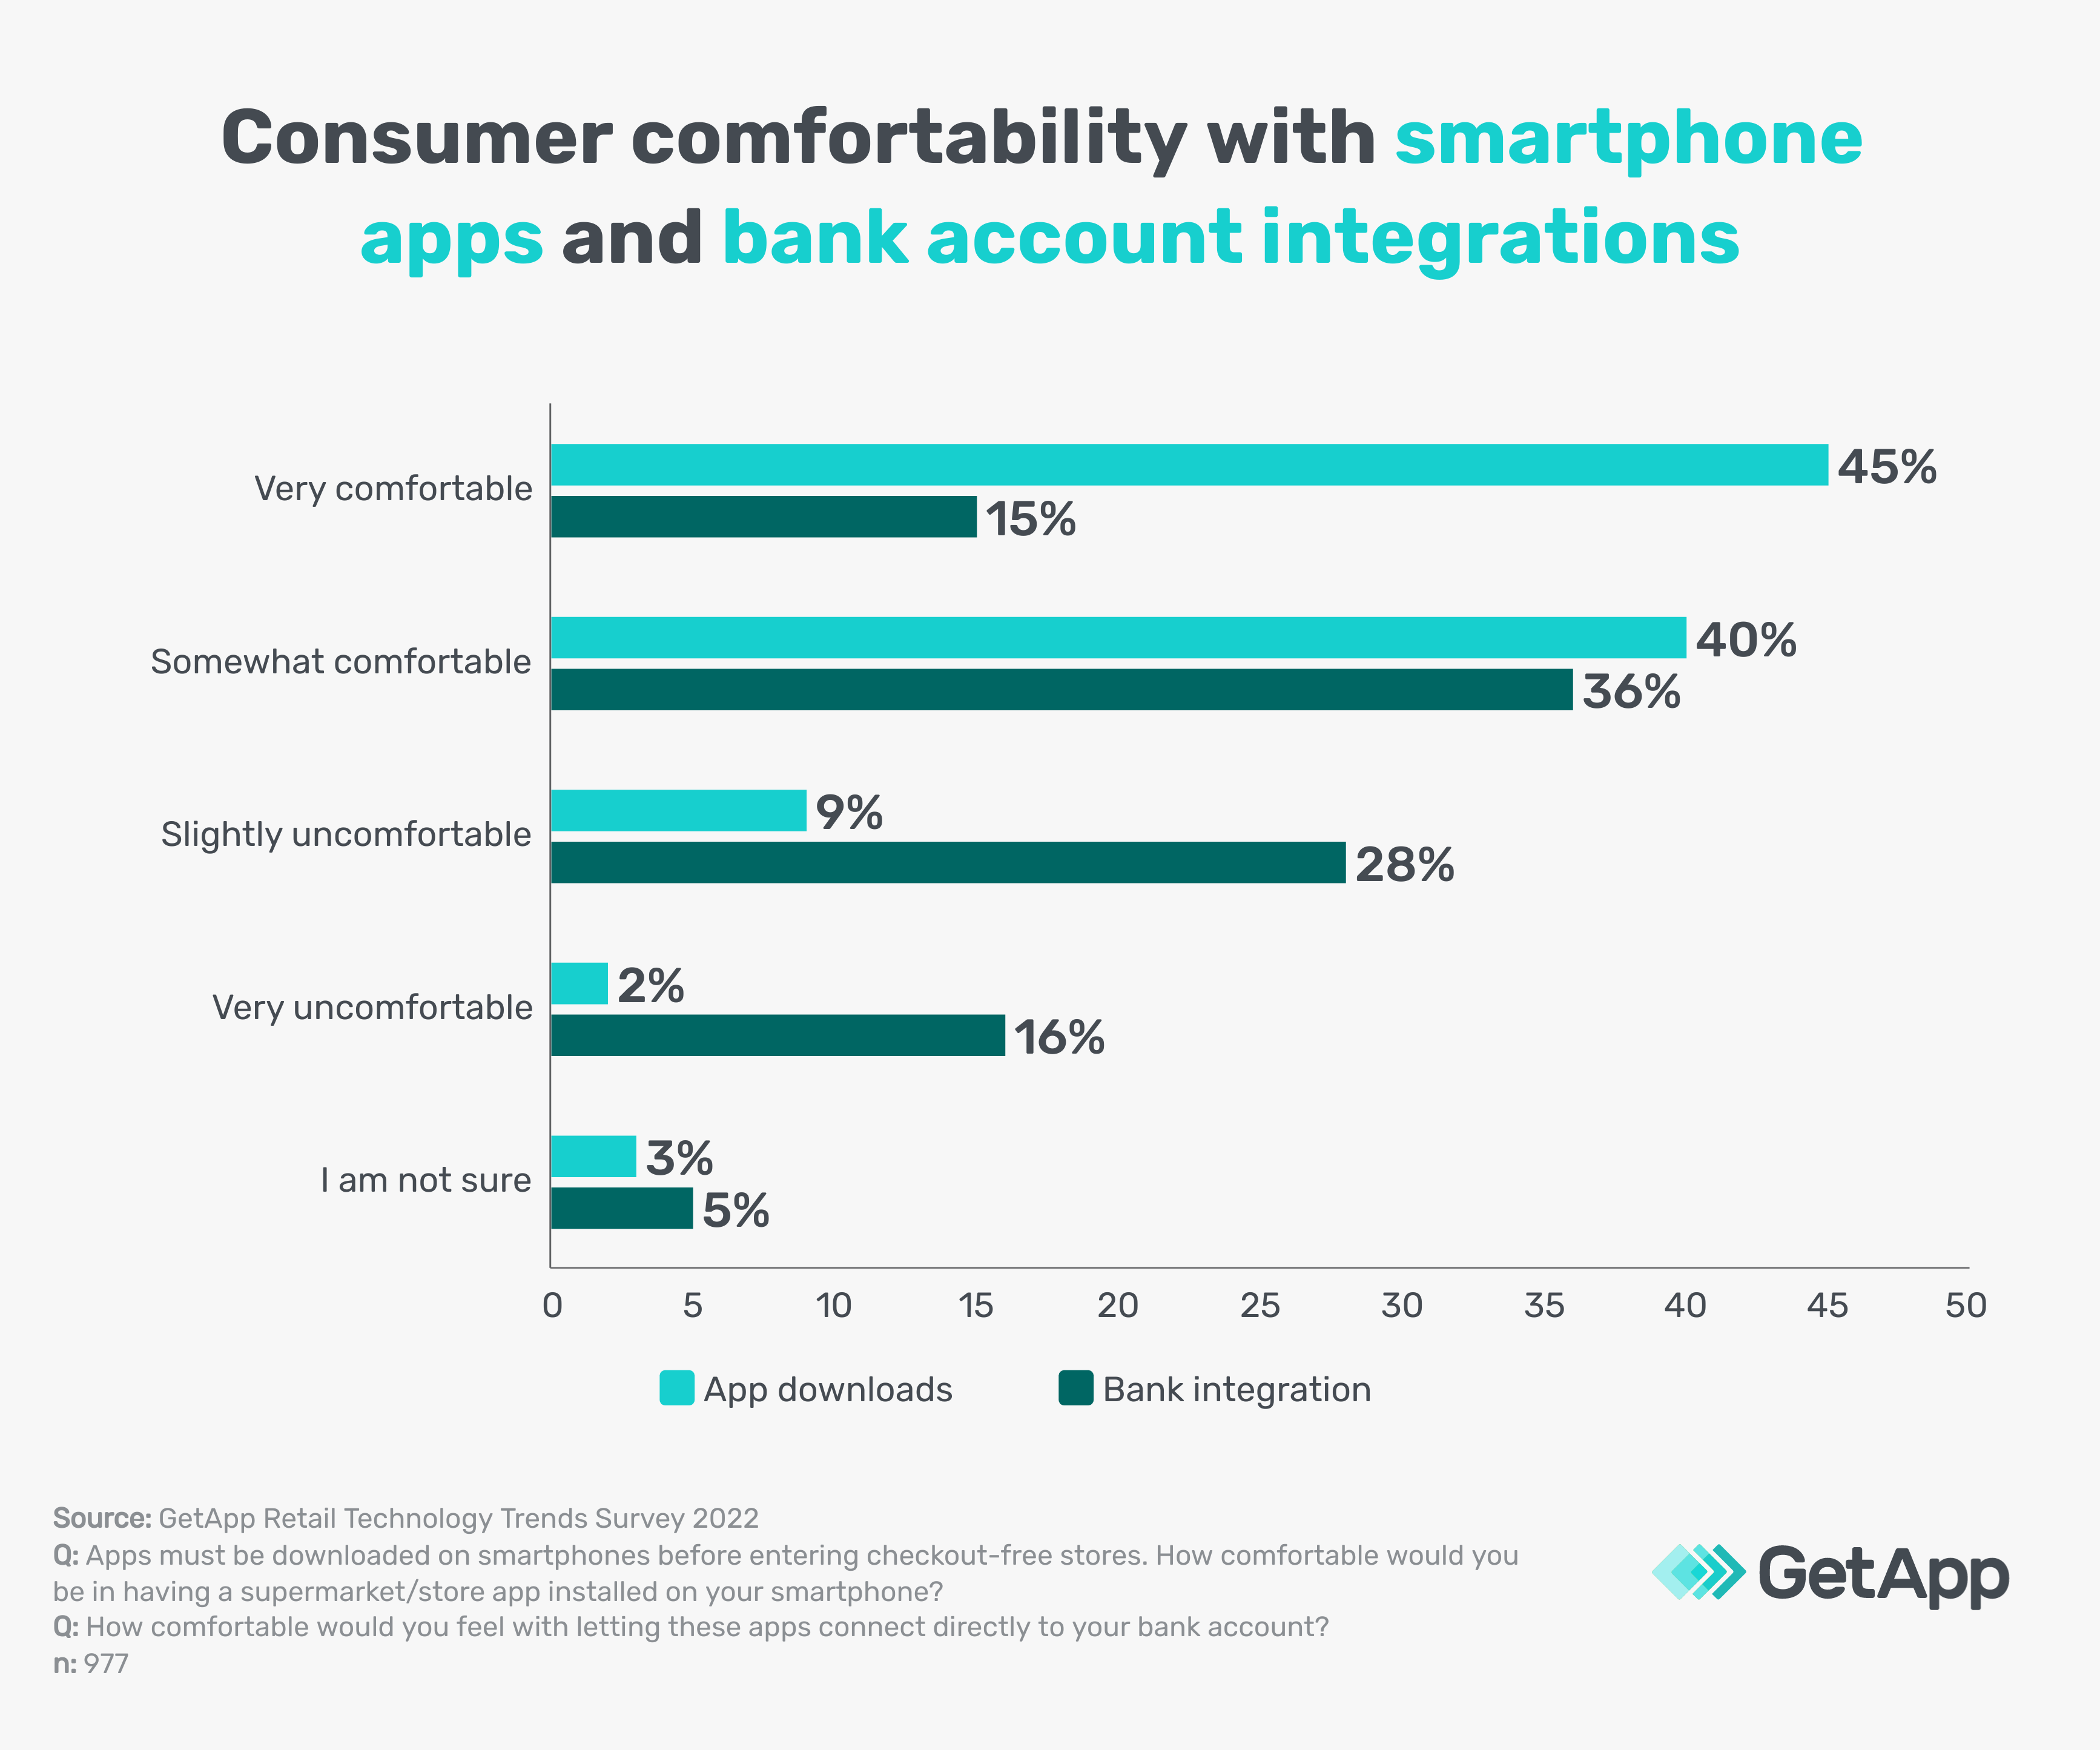 how comfortable are consumers with app downloads and bank connections from grocery store apps?